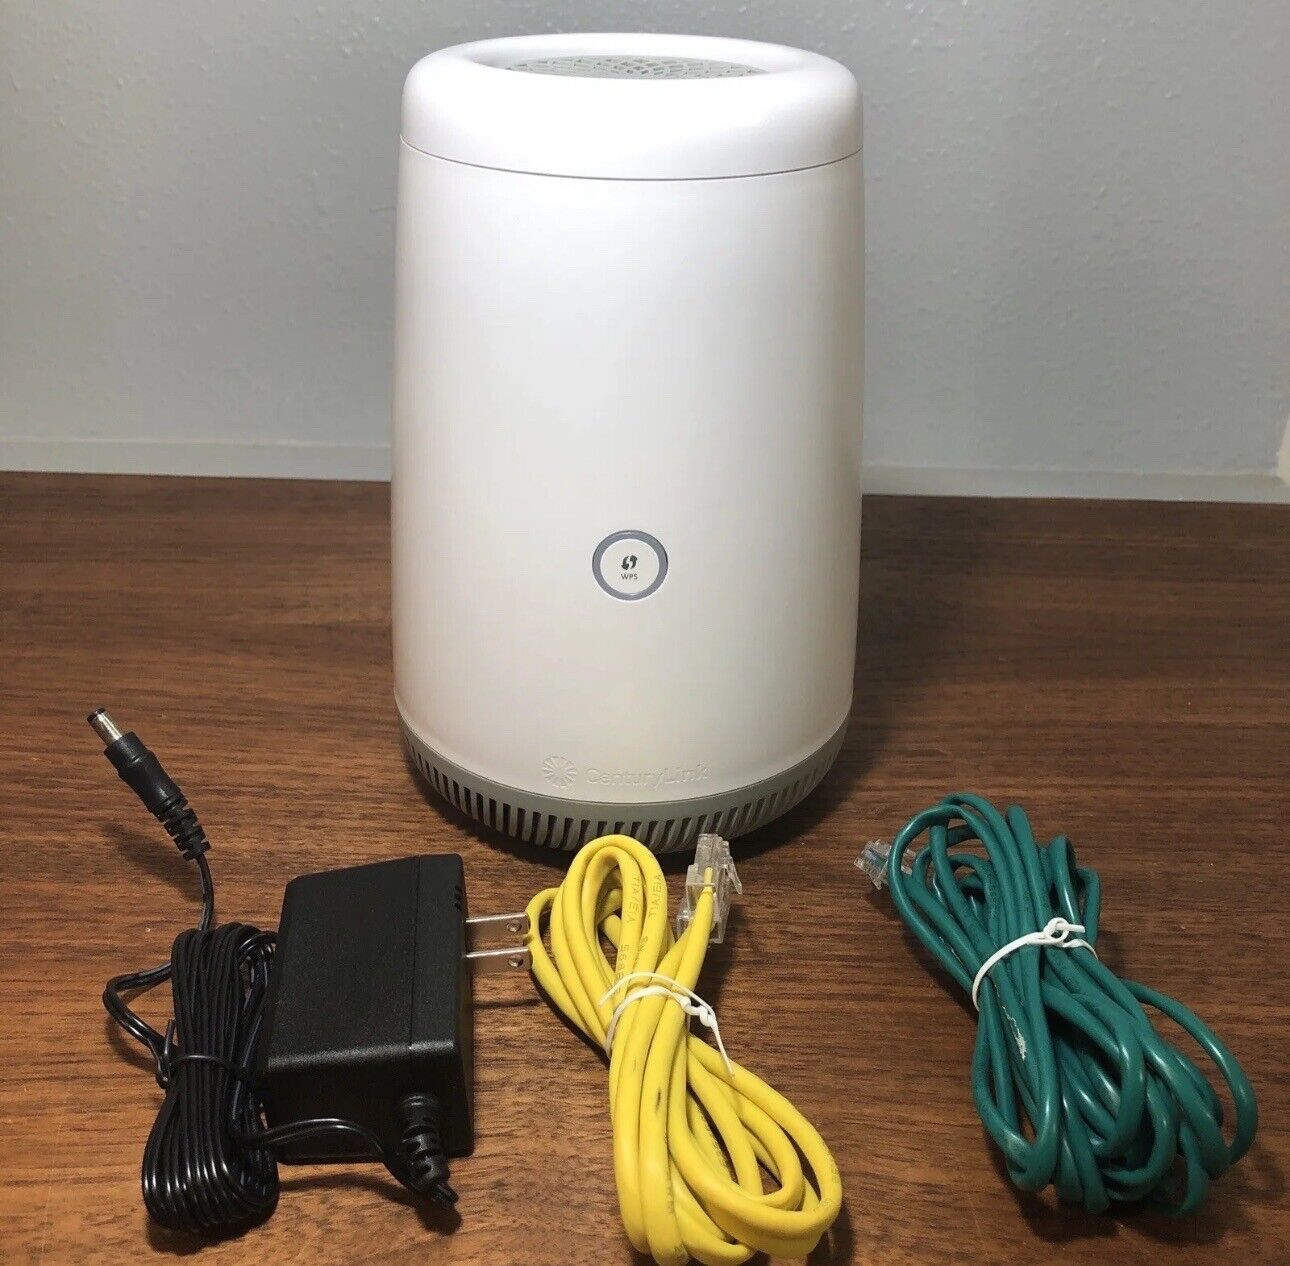 CenturyLink C4000LG Wi-Fi DSL Internet Modem Router Tested w/all Cables